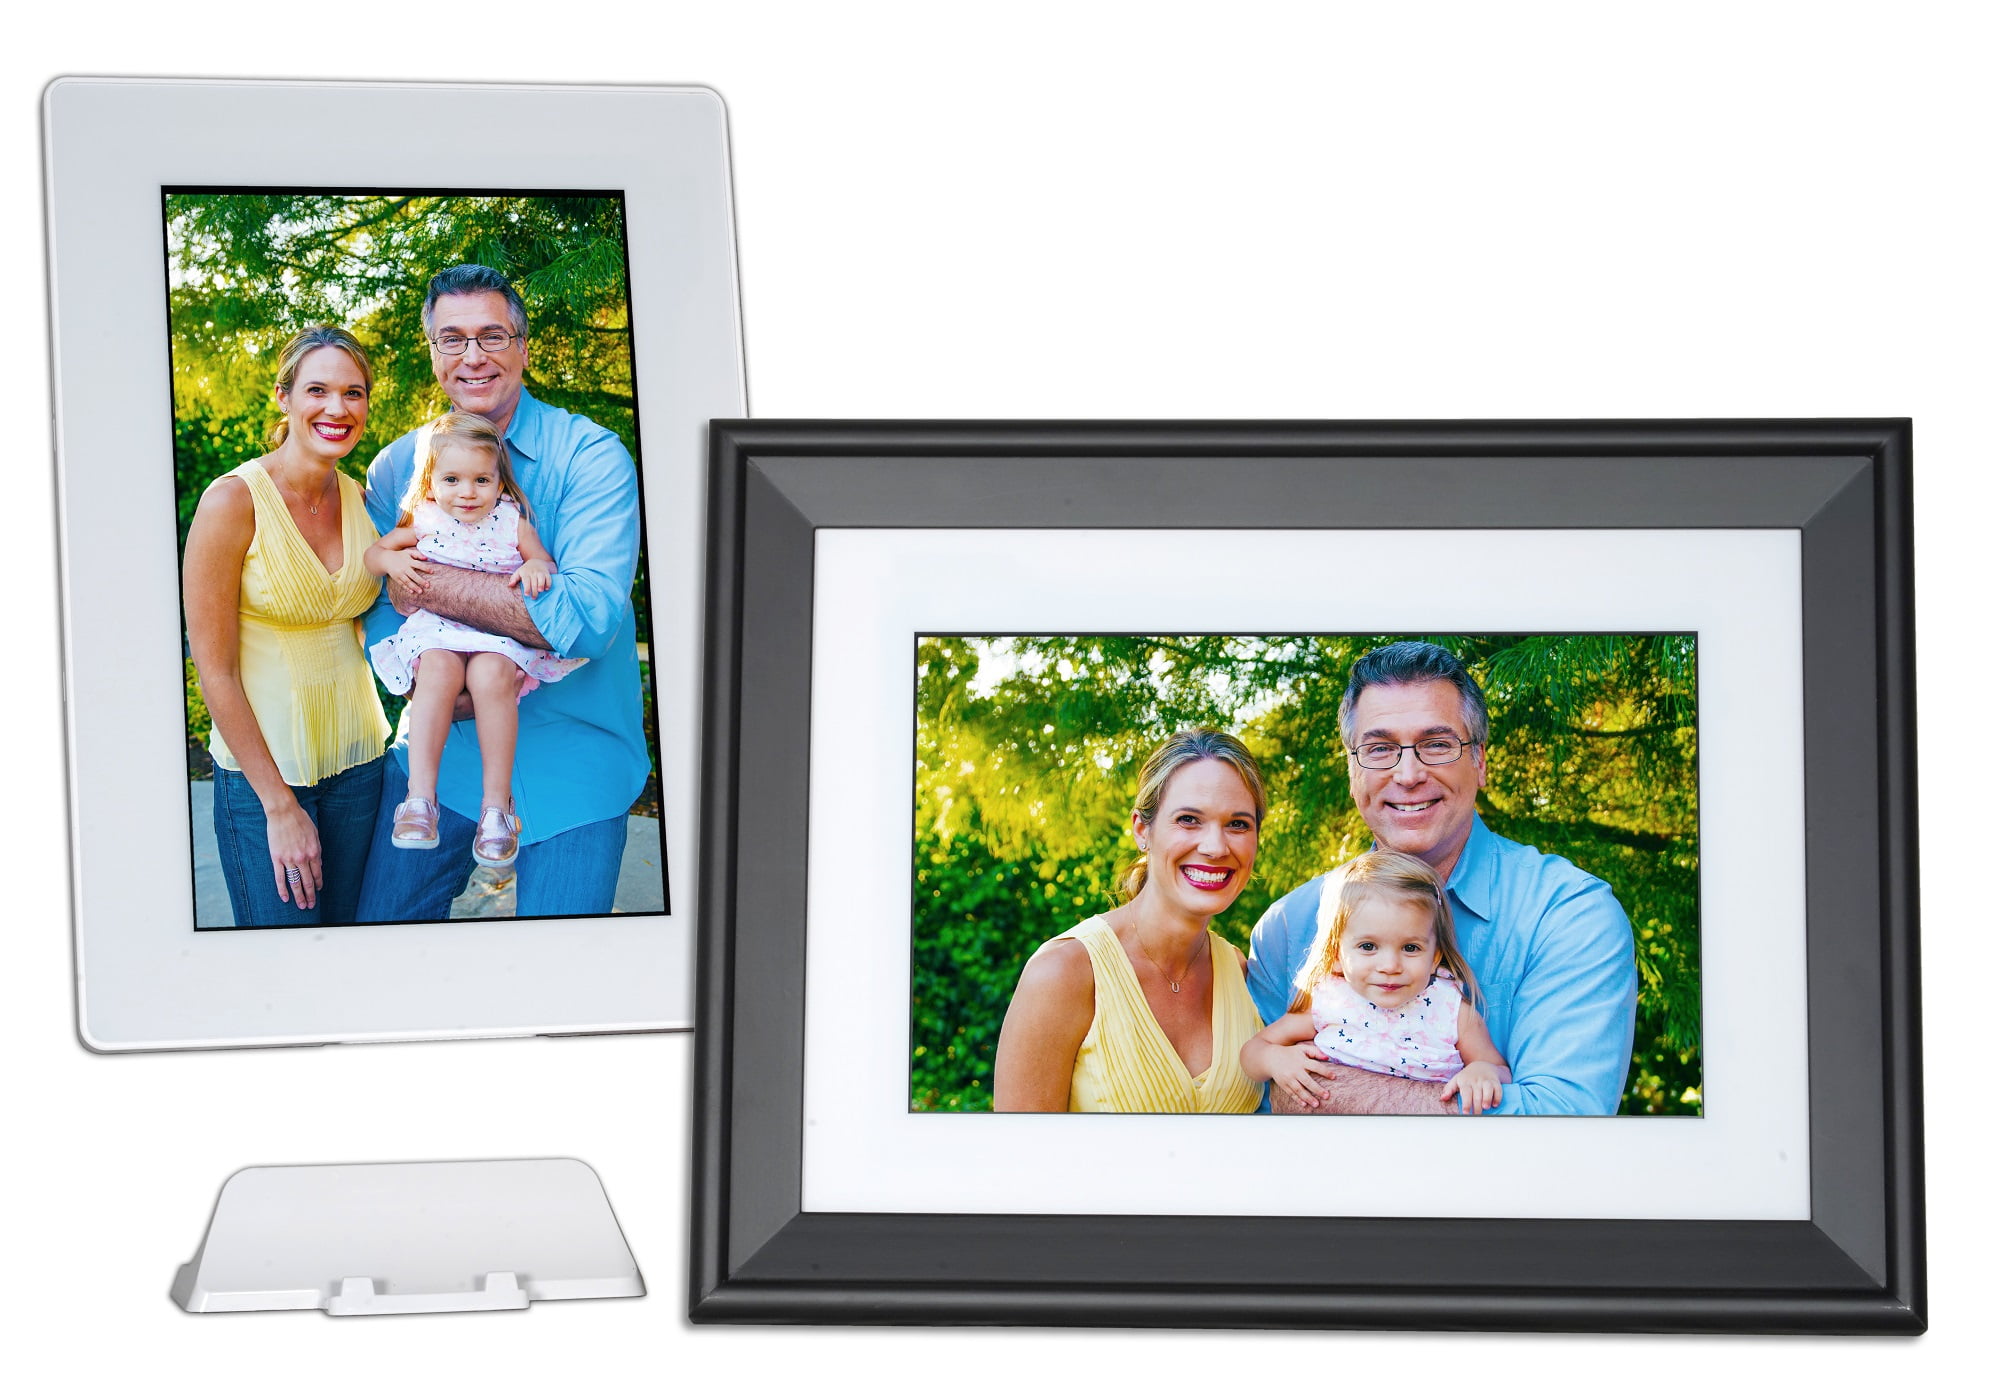 Feelcare 16GB 5ghz Wifi Digital Picture Frame 10 inch, IPS FHD 